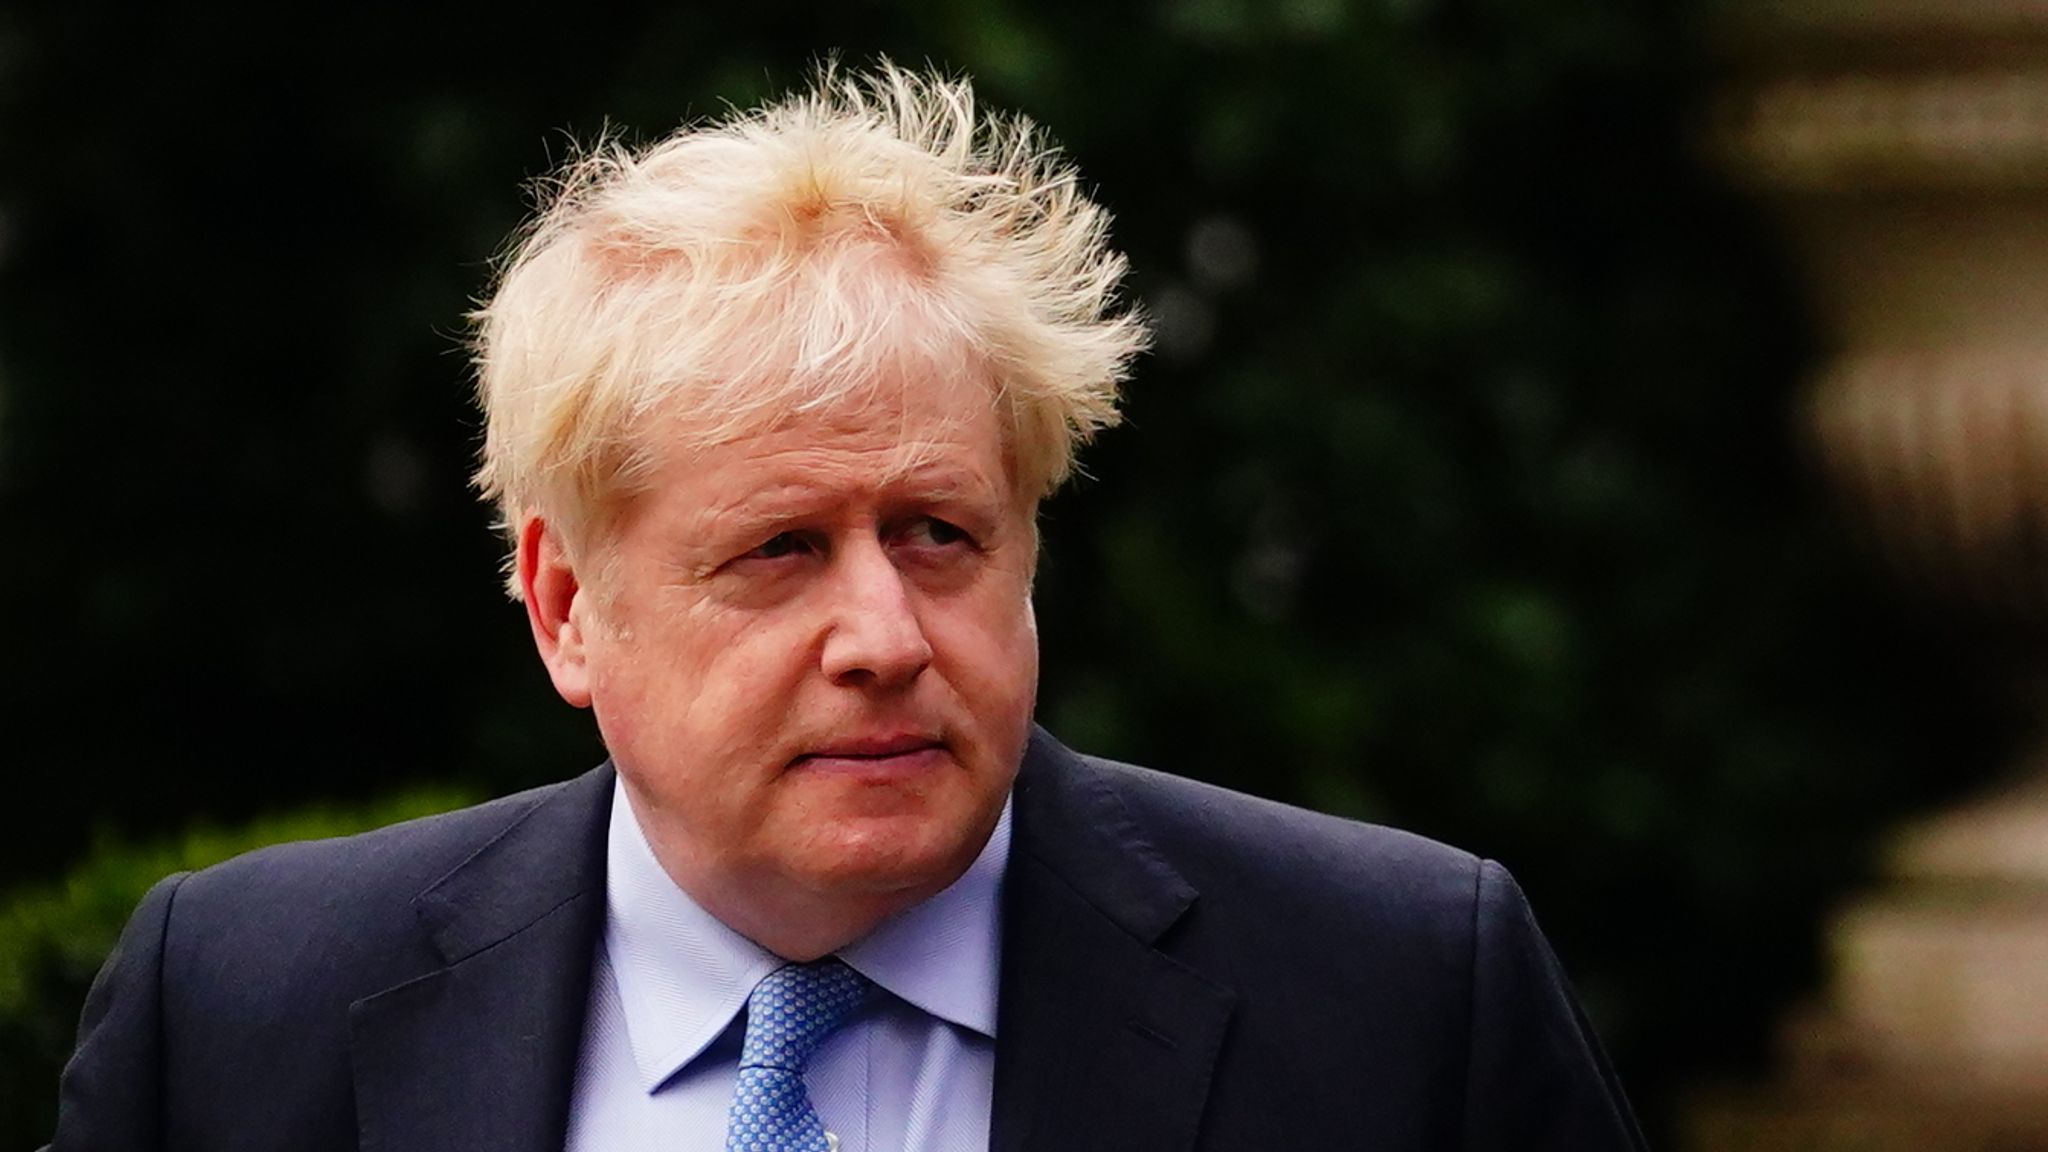 Boris Johnson vows 'I'll be back' as ex-prime minister formally resigns as MP